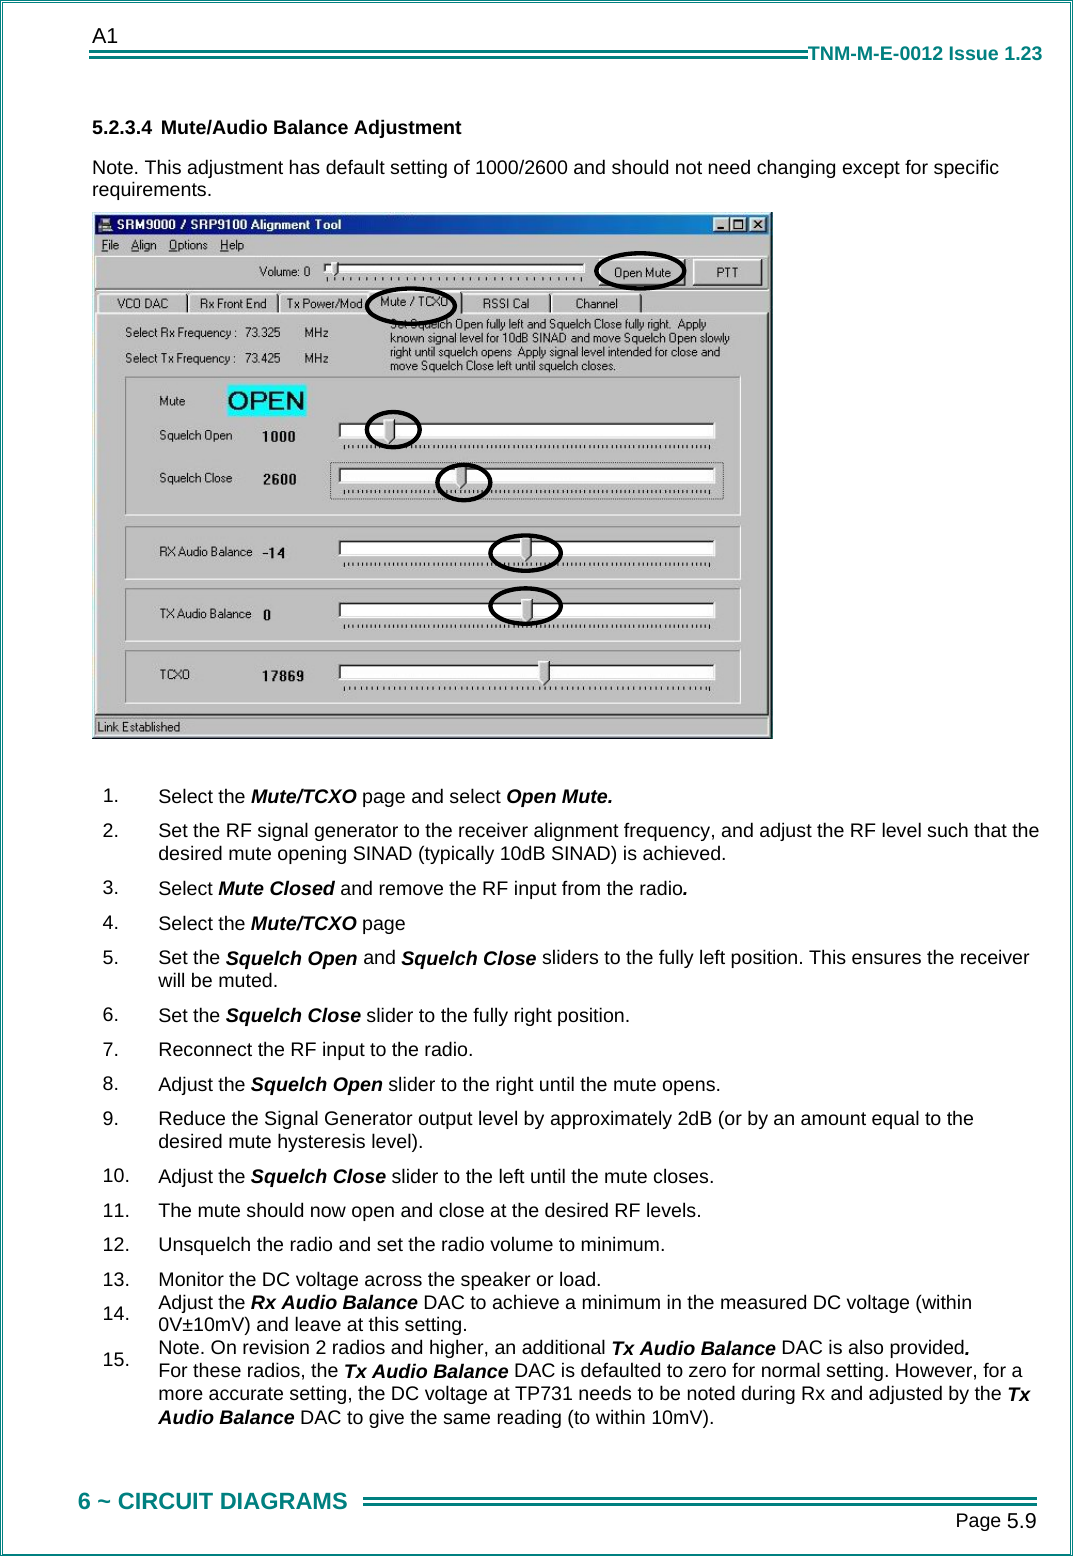 A1      Page 5.9  6 ~ CIRCUIT DIAGRAMS TNM-M-E-0012 Issue 1.23 5.2.3.4 Mute/Audio Balance Adjustment Note. This adjustment has default setting of 1000/2600 and should not need changing except for specific requirements.   1.  Select the Mute/TCXO page and select Open Mute. 2.  Set the RF signal generator to the receiver alignment frequency, and adjust the RF level such that the desired mute opening SINAD (typically 10dB SINAD) is achieved. 3.  Select Mute Closed and remove the RF input from the radio. 4.  Select the Mute/TCXO page 5.  Set the Squelch Open and Squelch Close sliders to the fully left position. This ensures the receiver will be muted. 6.  Set the Squelch Close slider to the fully right position. 7.  Reconnect the RF input to the radio. 8.  Adjust the Squelch Open slider to the right until the mute opens. 9.  Reduce the Signal Generator output level by approximately 2dB (or by an amount equal to the desired mute hysteresis level). 10.  Adjust the Squelch Close slider to the left until the mute closes. 11.  The mute should now open and close at the desired RF levels. 12.  Unsquelch the radio and set the radio volume to minimum. 13.  Monitor the DC voltage across the speaker or load. 14.  Adjust the Rx Audio Balance DAC to achieve a minimum in the measured DC voltage (within 0V±10mV) and leave at this setting. 15.  Note. On revision 2 radios and higher, an additional Tx Audio Balance DAC is also provided. For these radios, the Tx Audio Balance DAC is defaulted to zero for normal setting. However, for a more accurate setting, the DC voltage at TP731 needs to be noted during Rx and adjusted by the Tx Audio Balance DAC to give the same reading (to within 10mV).  